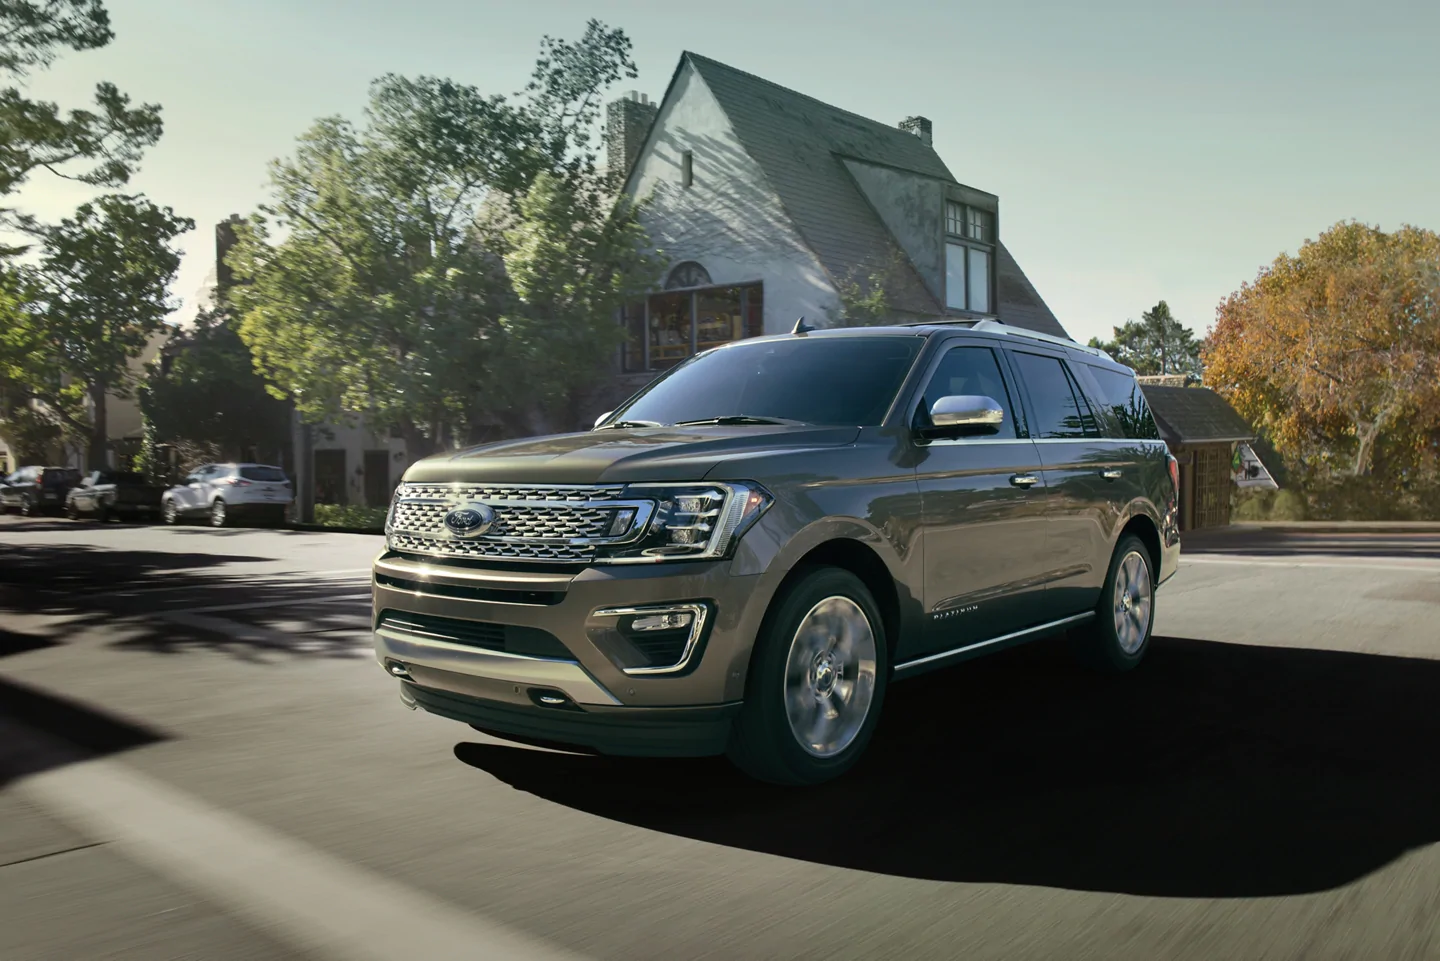 2021 Ford Expedition vs 2021 Toyota Sequoia near Dothan, AL